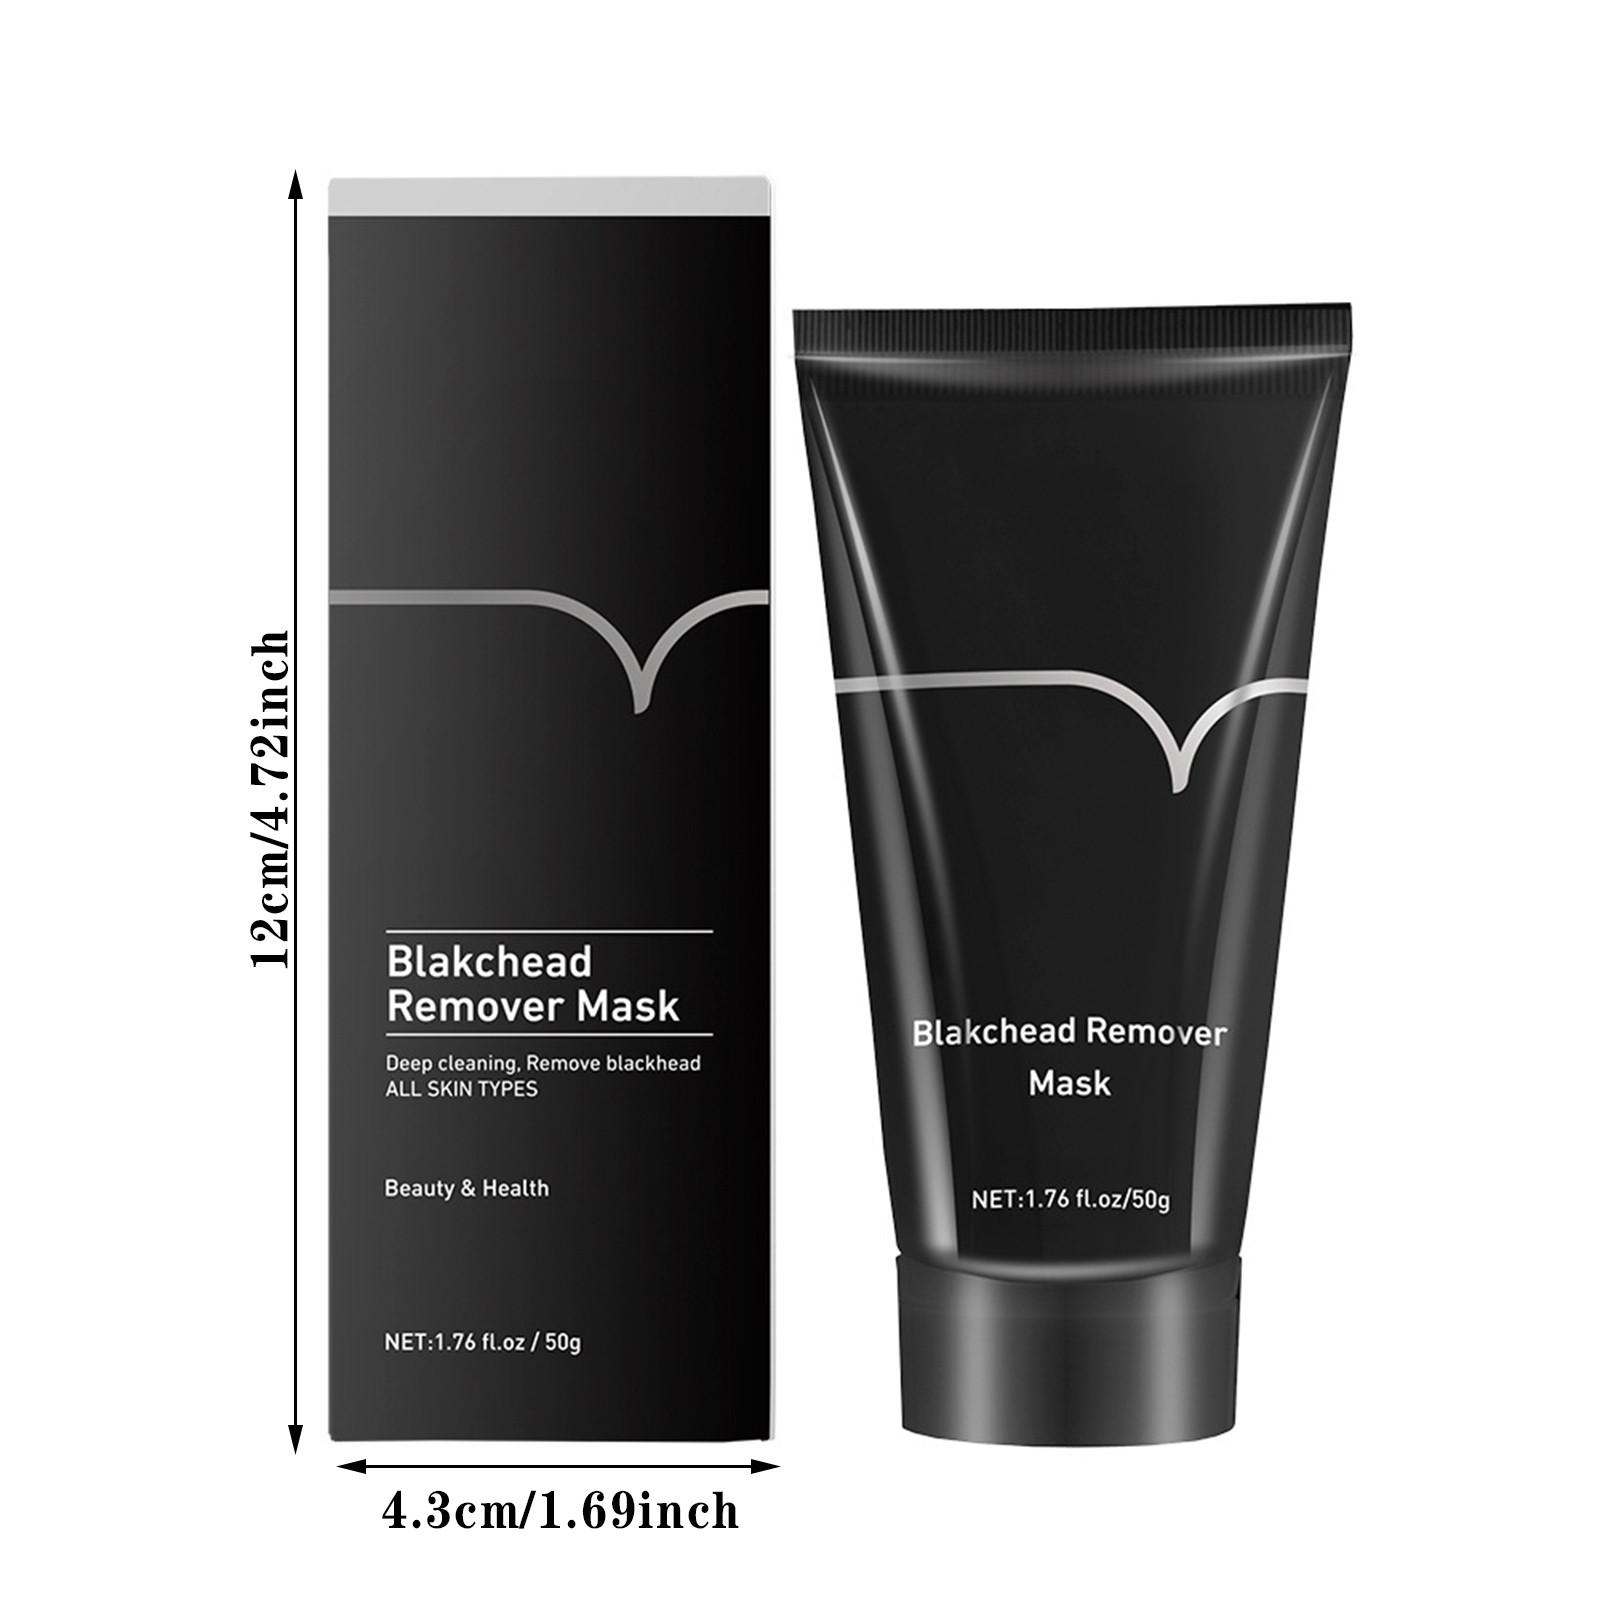 Melotizhi Blackhead Removal Purifying Exfoliating For Deep Cleaning Blackheads Dirt Pores Nose 50g - image 3 of 8